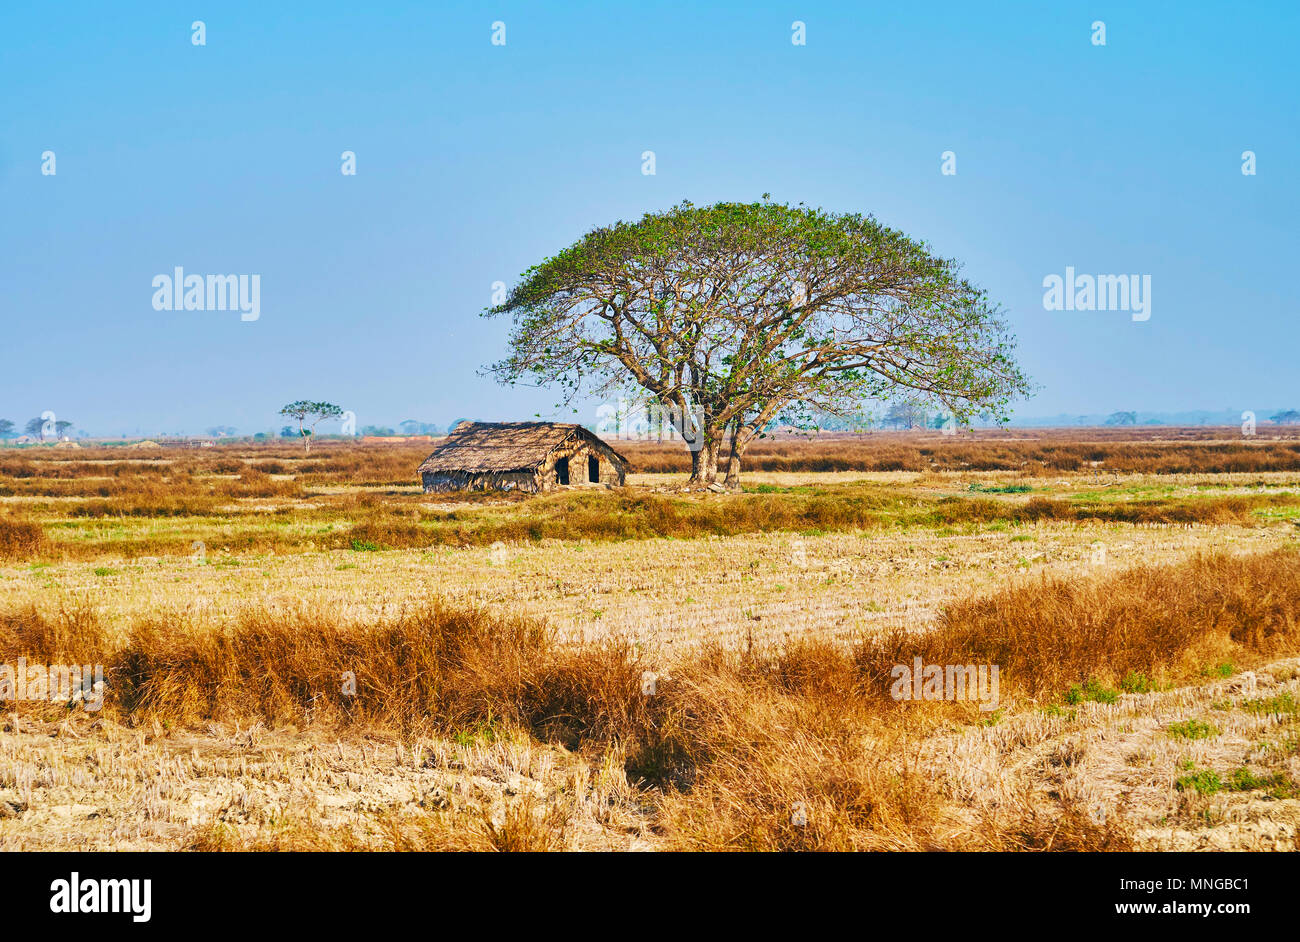 The tiny house made of palm leaves and bamboo under the giant umbrella-shaped tree in middle of yellow stubble field, Bago Region, Myanmar. Stock Photo